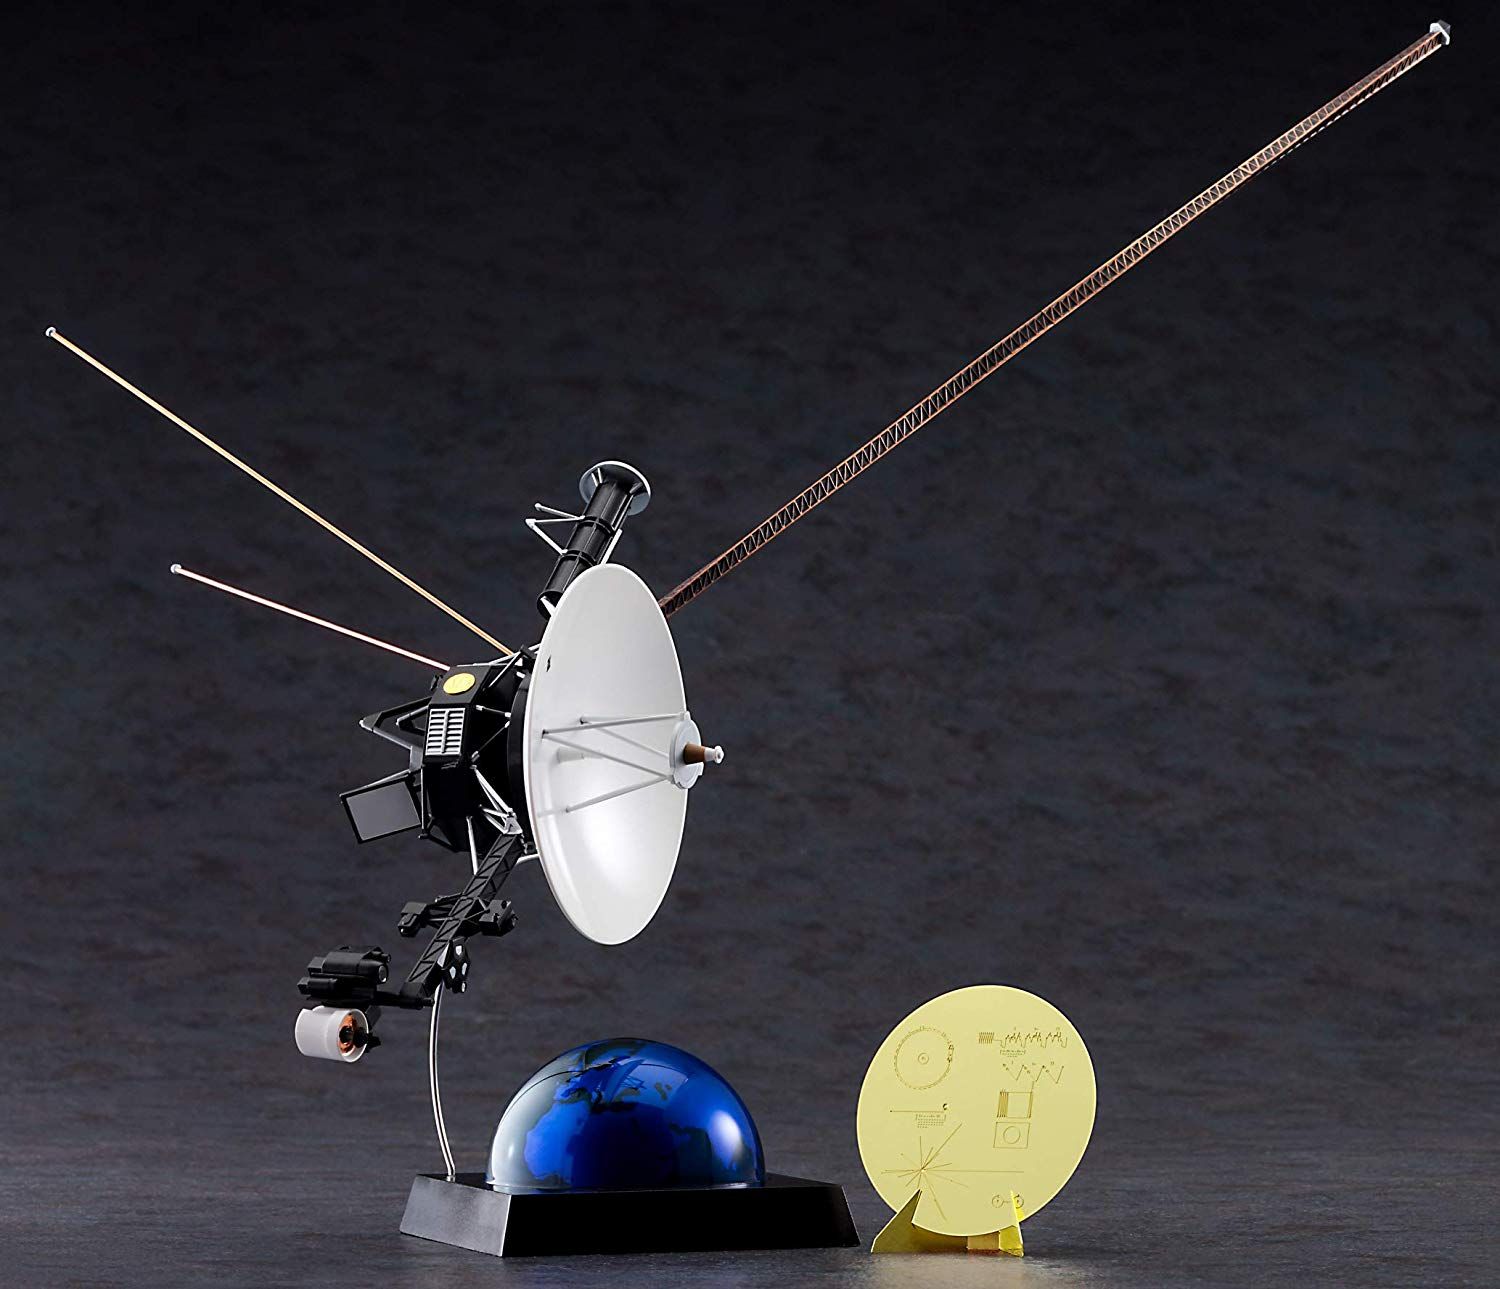 Hasegawa Unmanned Space Probe Voyager w/Golden Record Plate - BanzaiHobby